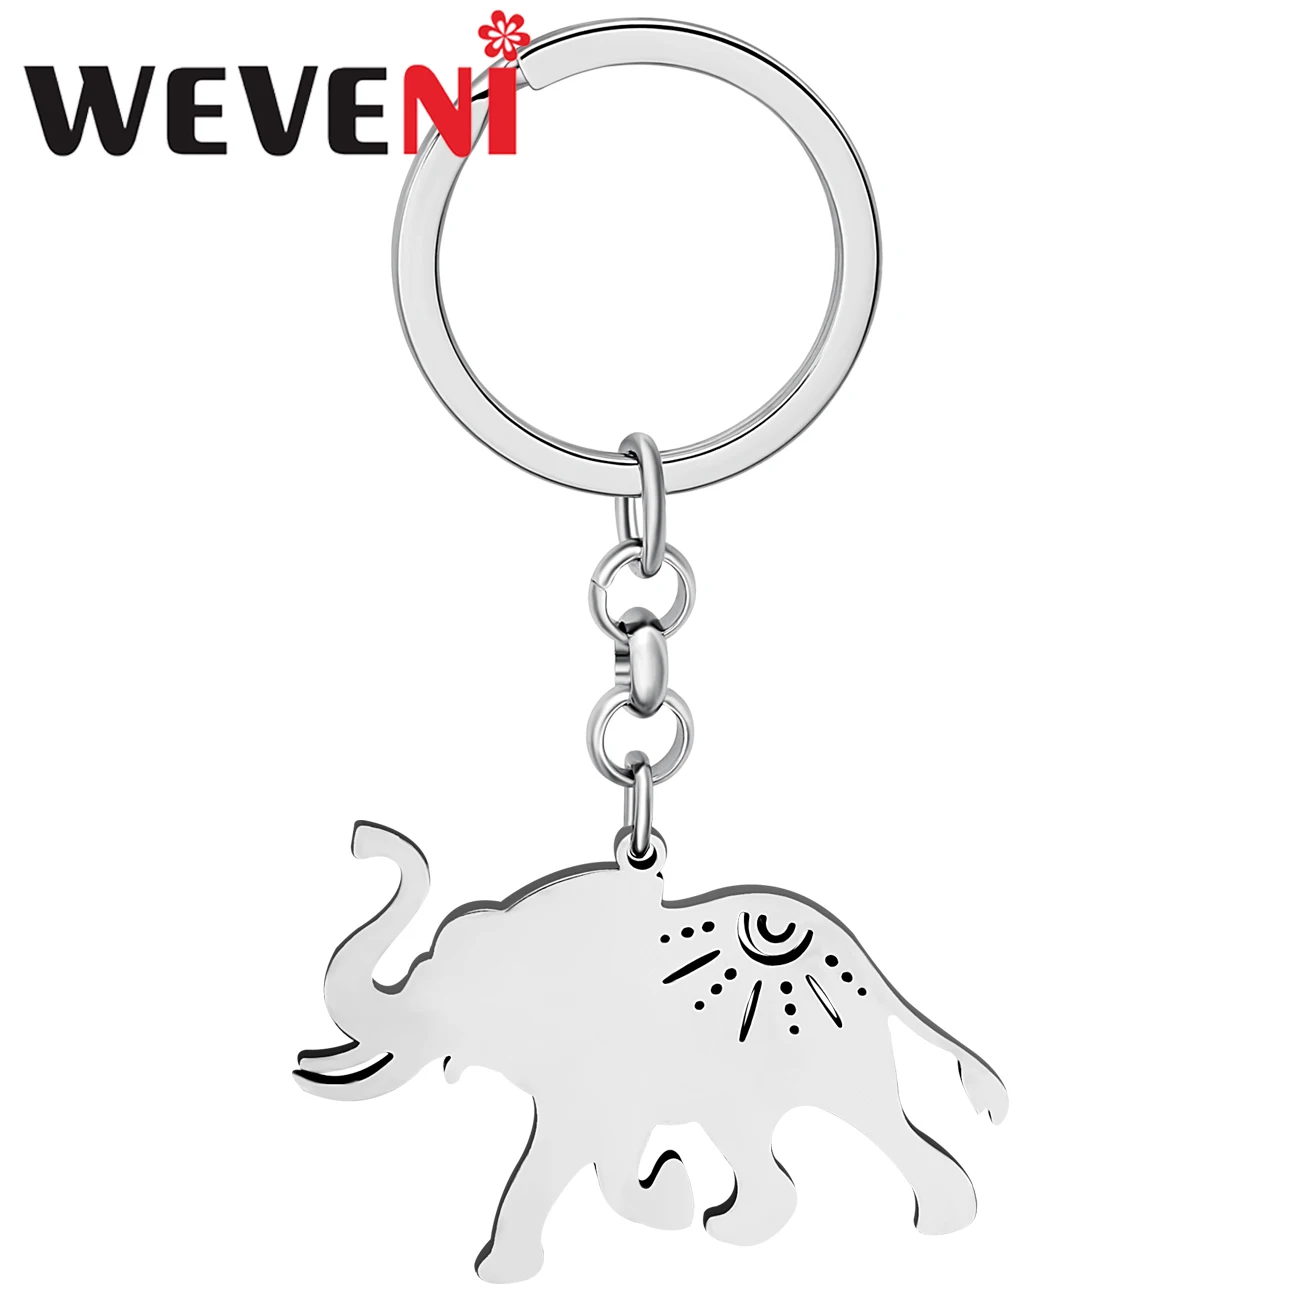 

WEVENI Stainless Steel Silver-plated Walk Elephant Keychains Metal Pendant Key Chains Accessories Charms Jewelry For Women Girls